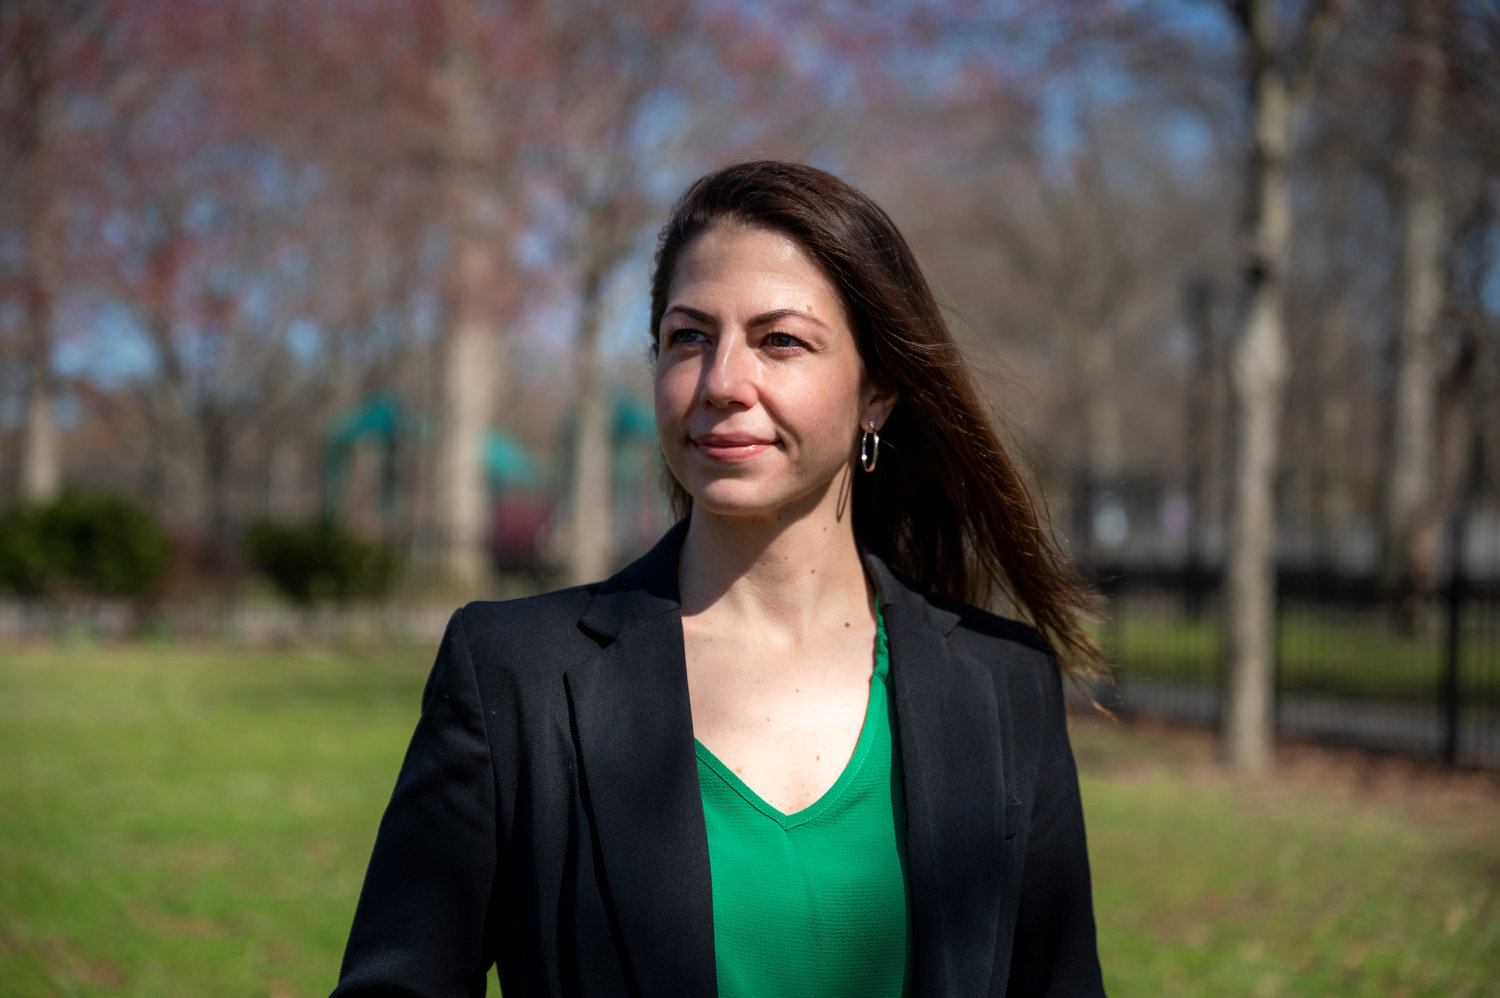 After not participating in the March special election to replace Councilman Andrew Cohen, social worker Abigail Martin finished third in last month’s Democratic primary. Martin, who mathematically has no chance of winning even in the ranked-choice contest, believes Councilman Eric Dinowitz will likely maintain his lead and continue as the district’s representative in City Hall for the next two years.